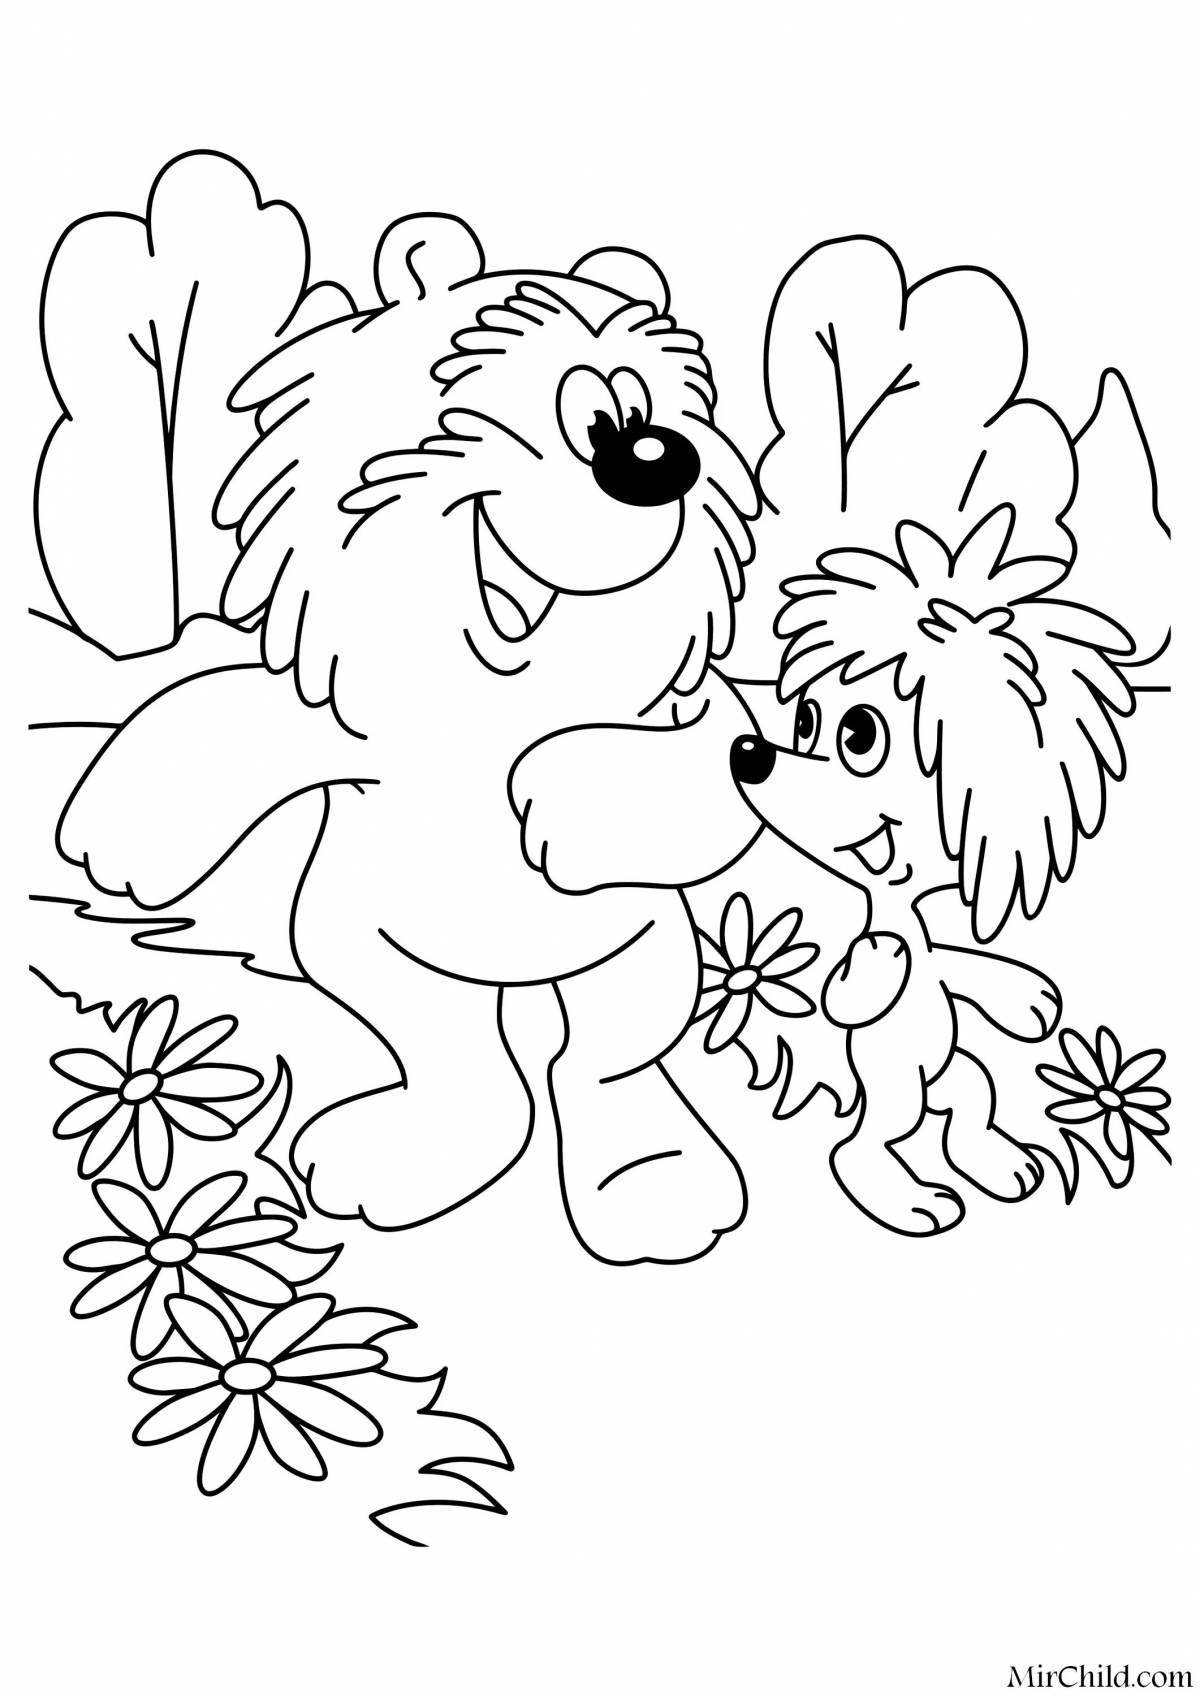 Colorful coloring hedgehog and teddy bear